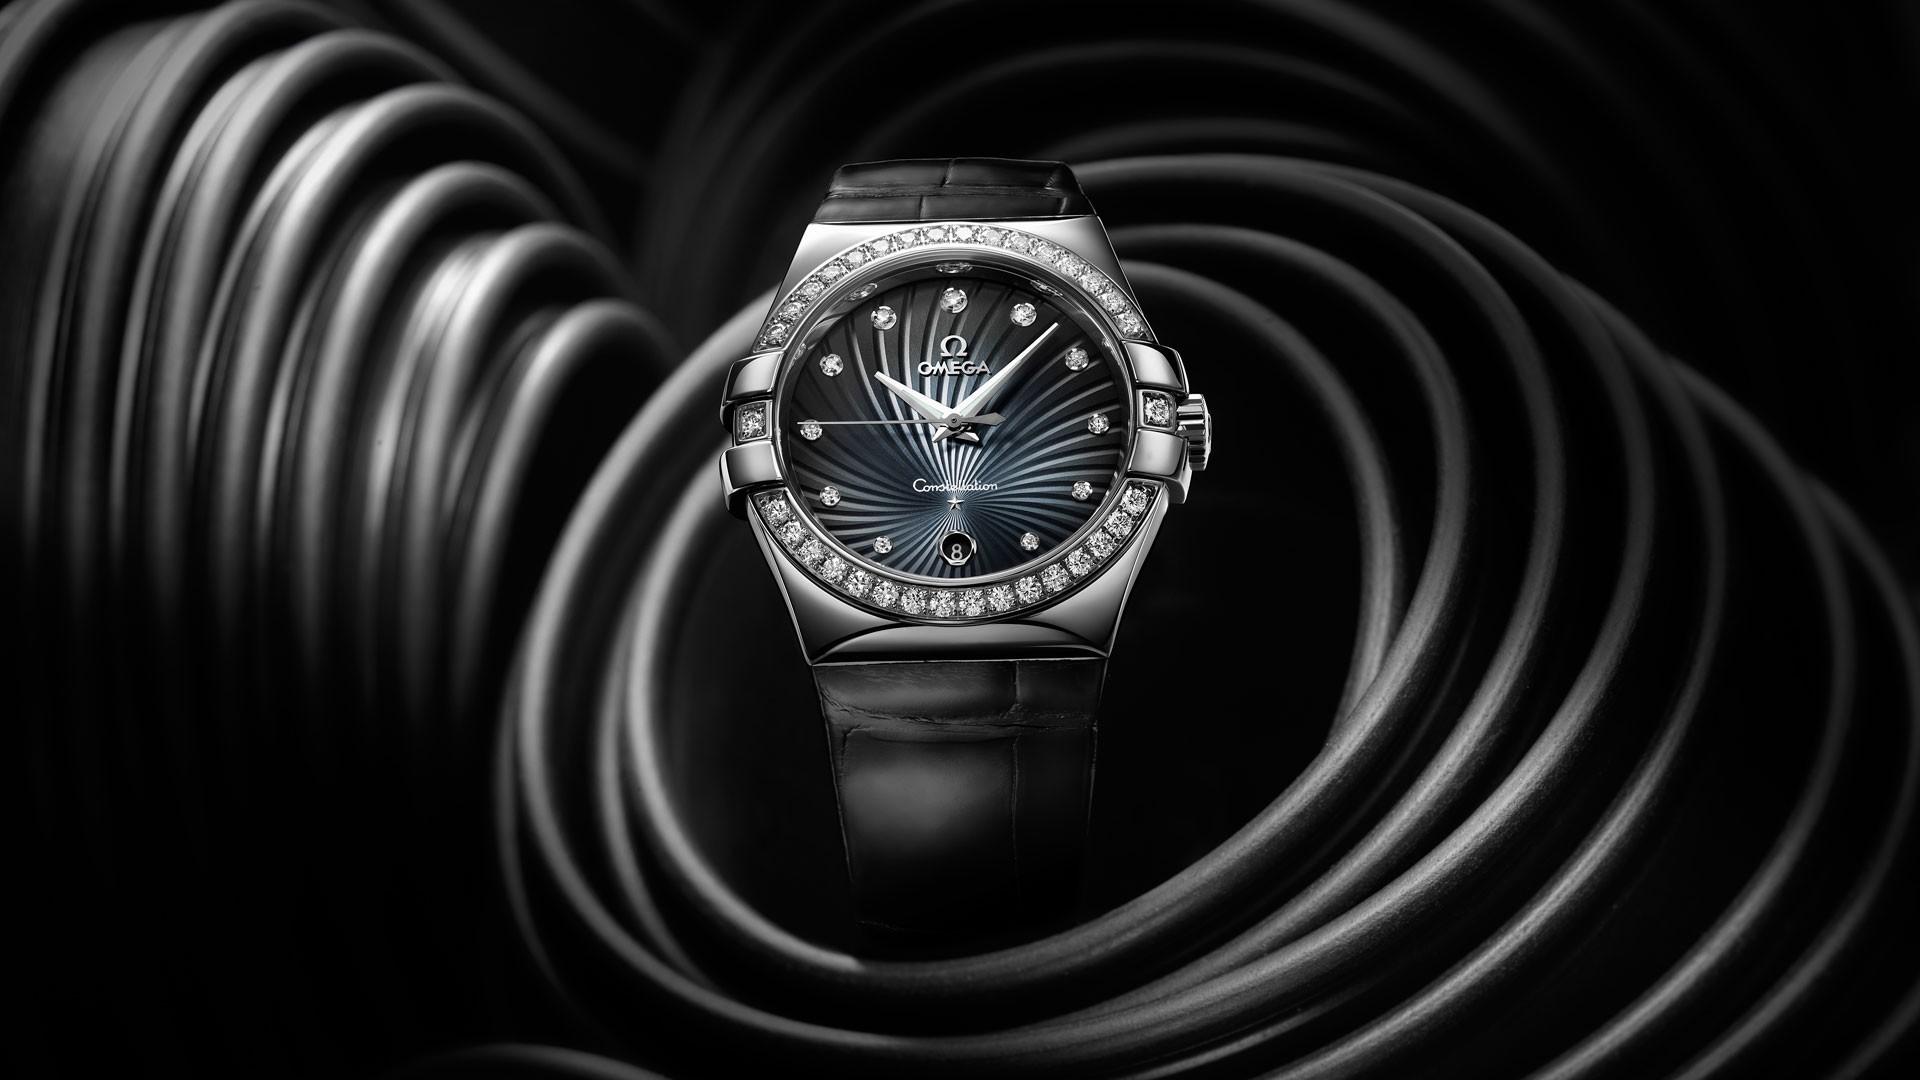 Constellation omega watches wallpaper